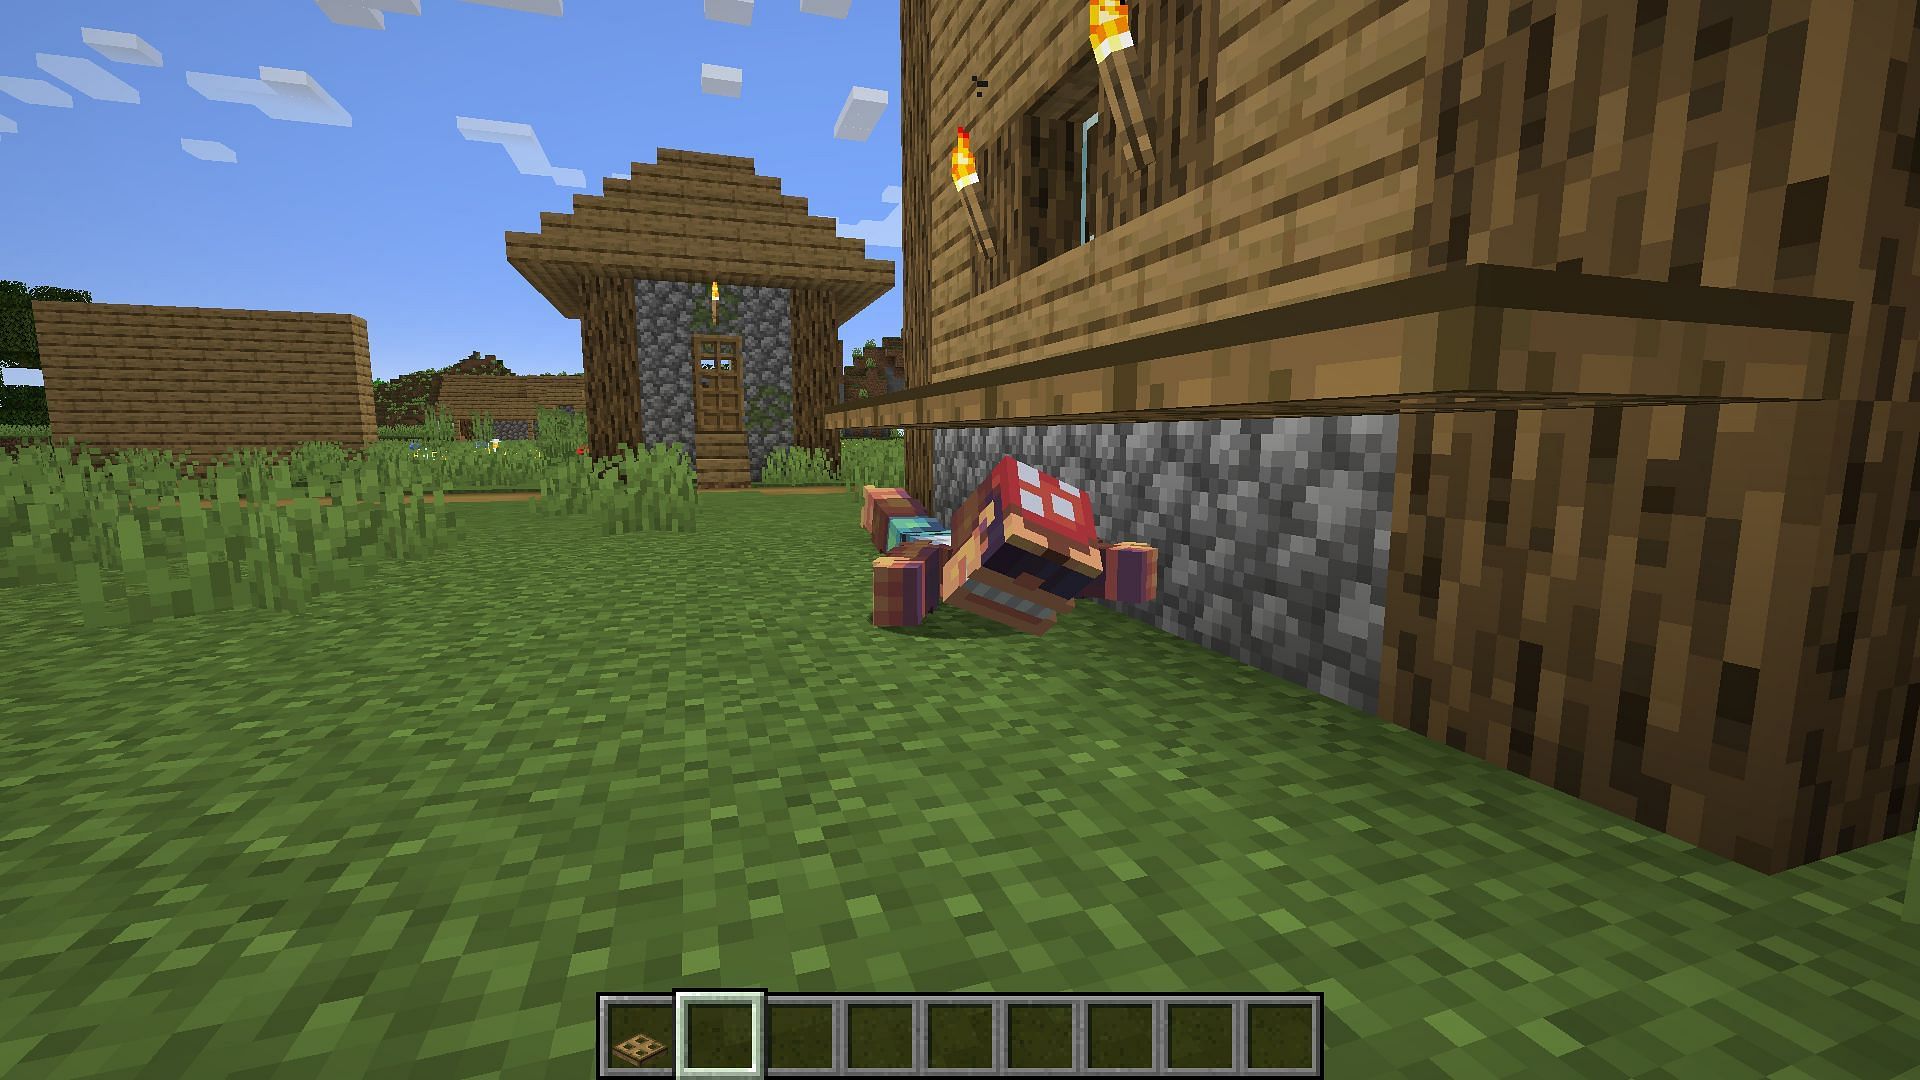 Activating trapdoors on a Minecraft player can place them in a crawling position (Image via Mojang)